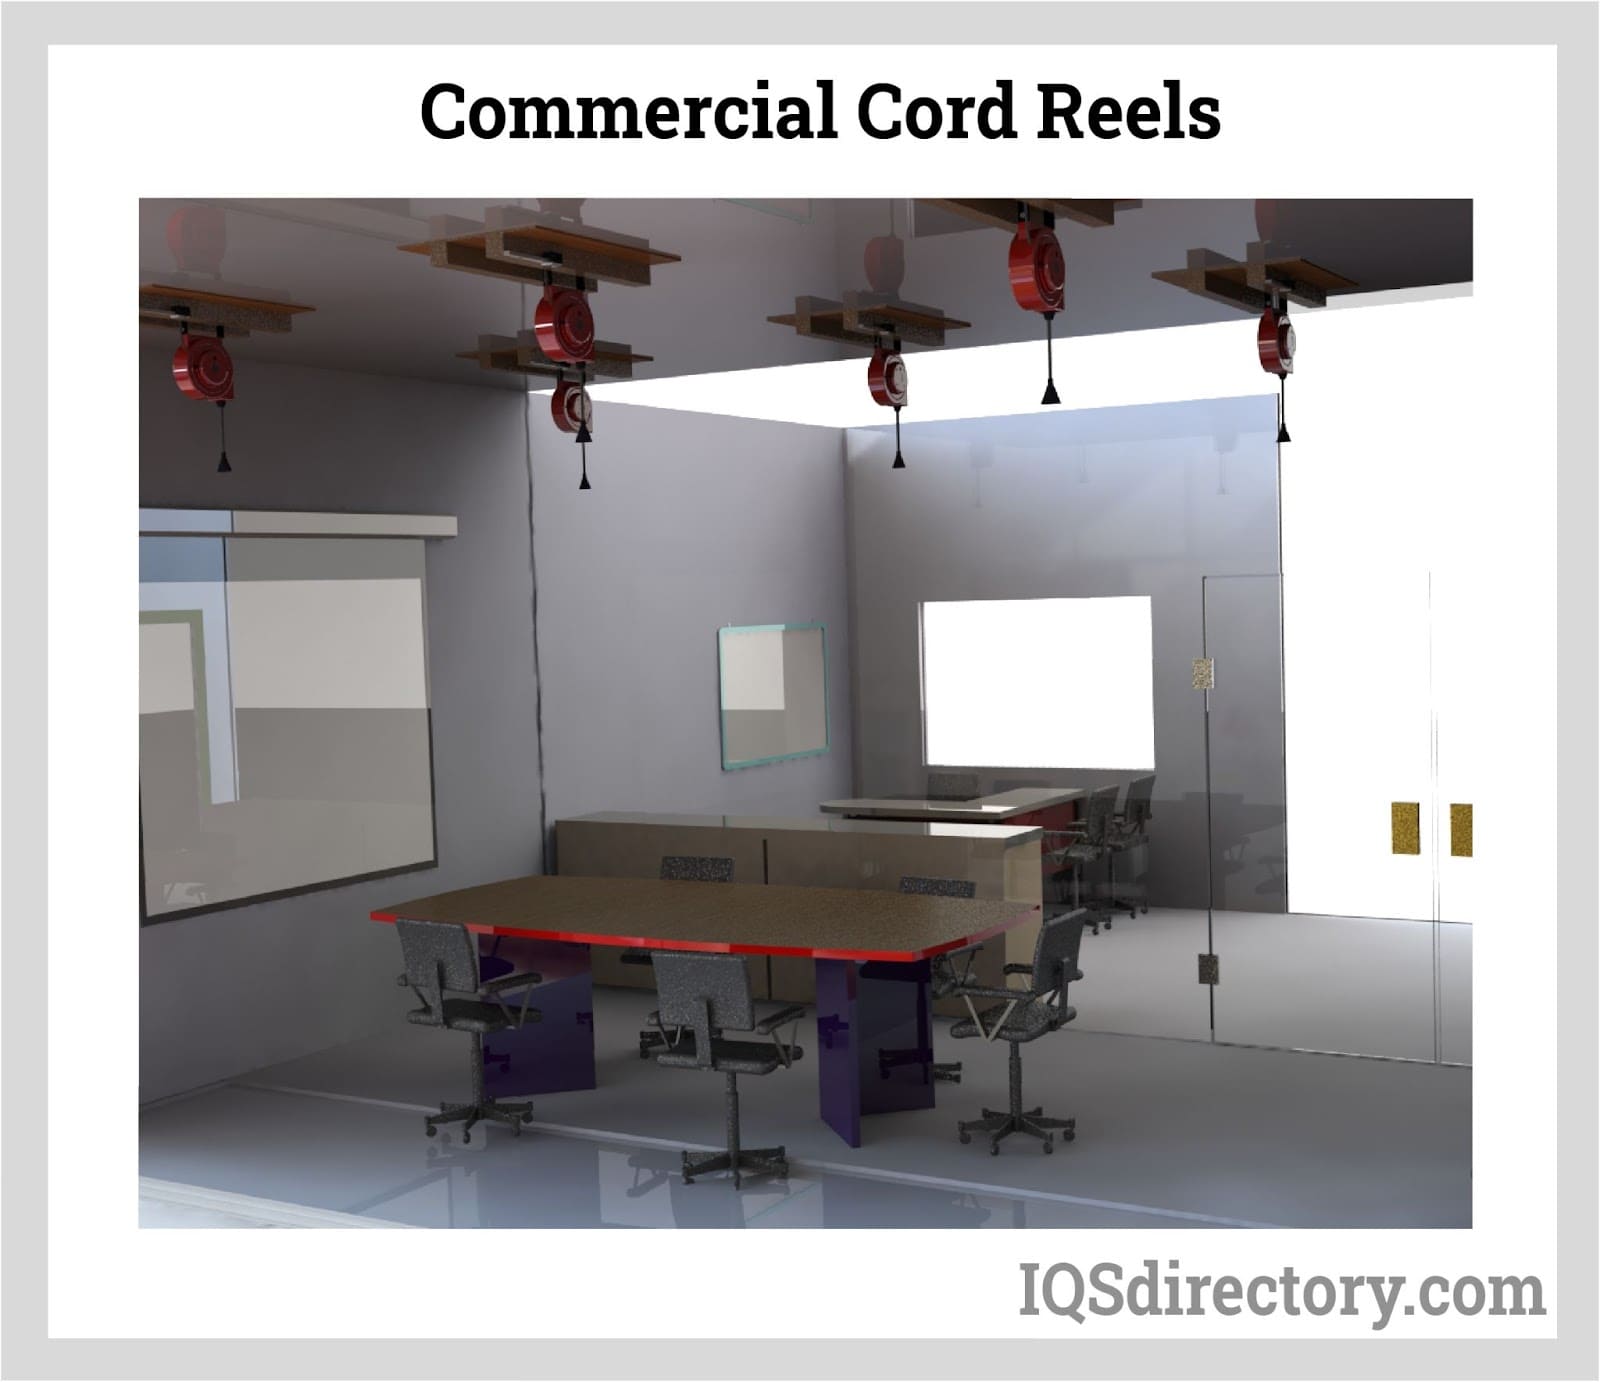 Commercial Cord Reels